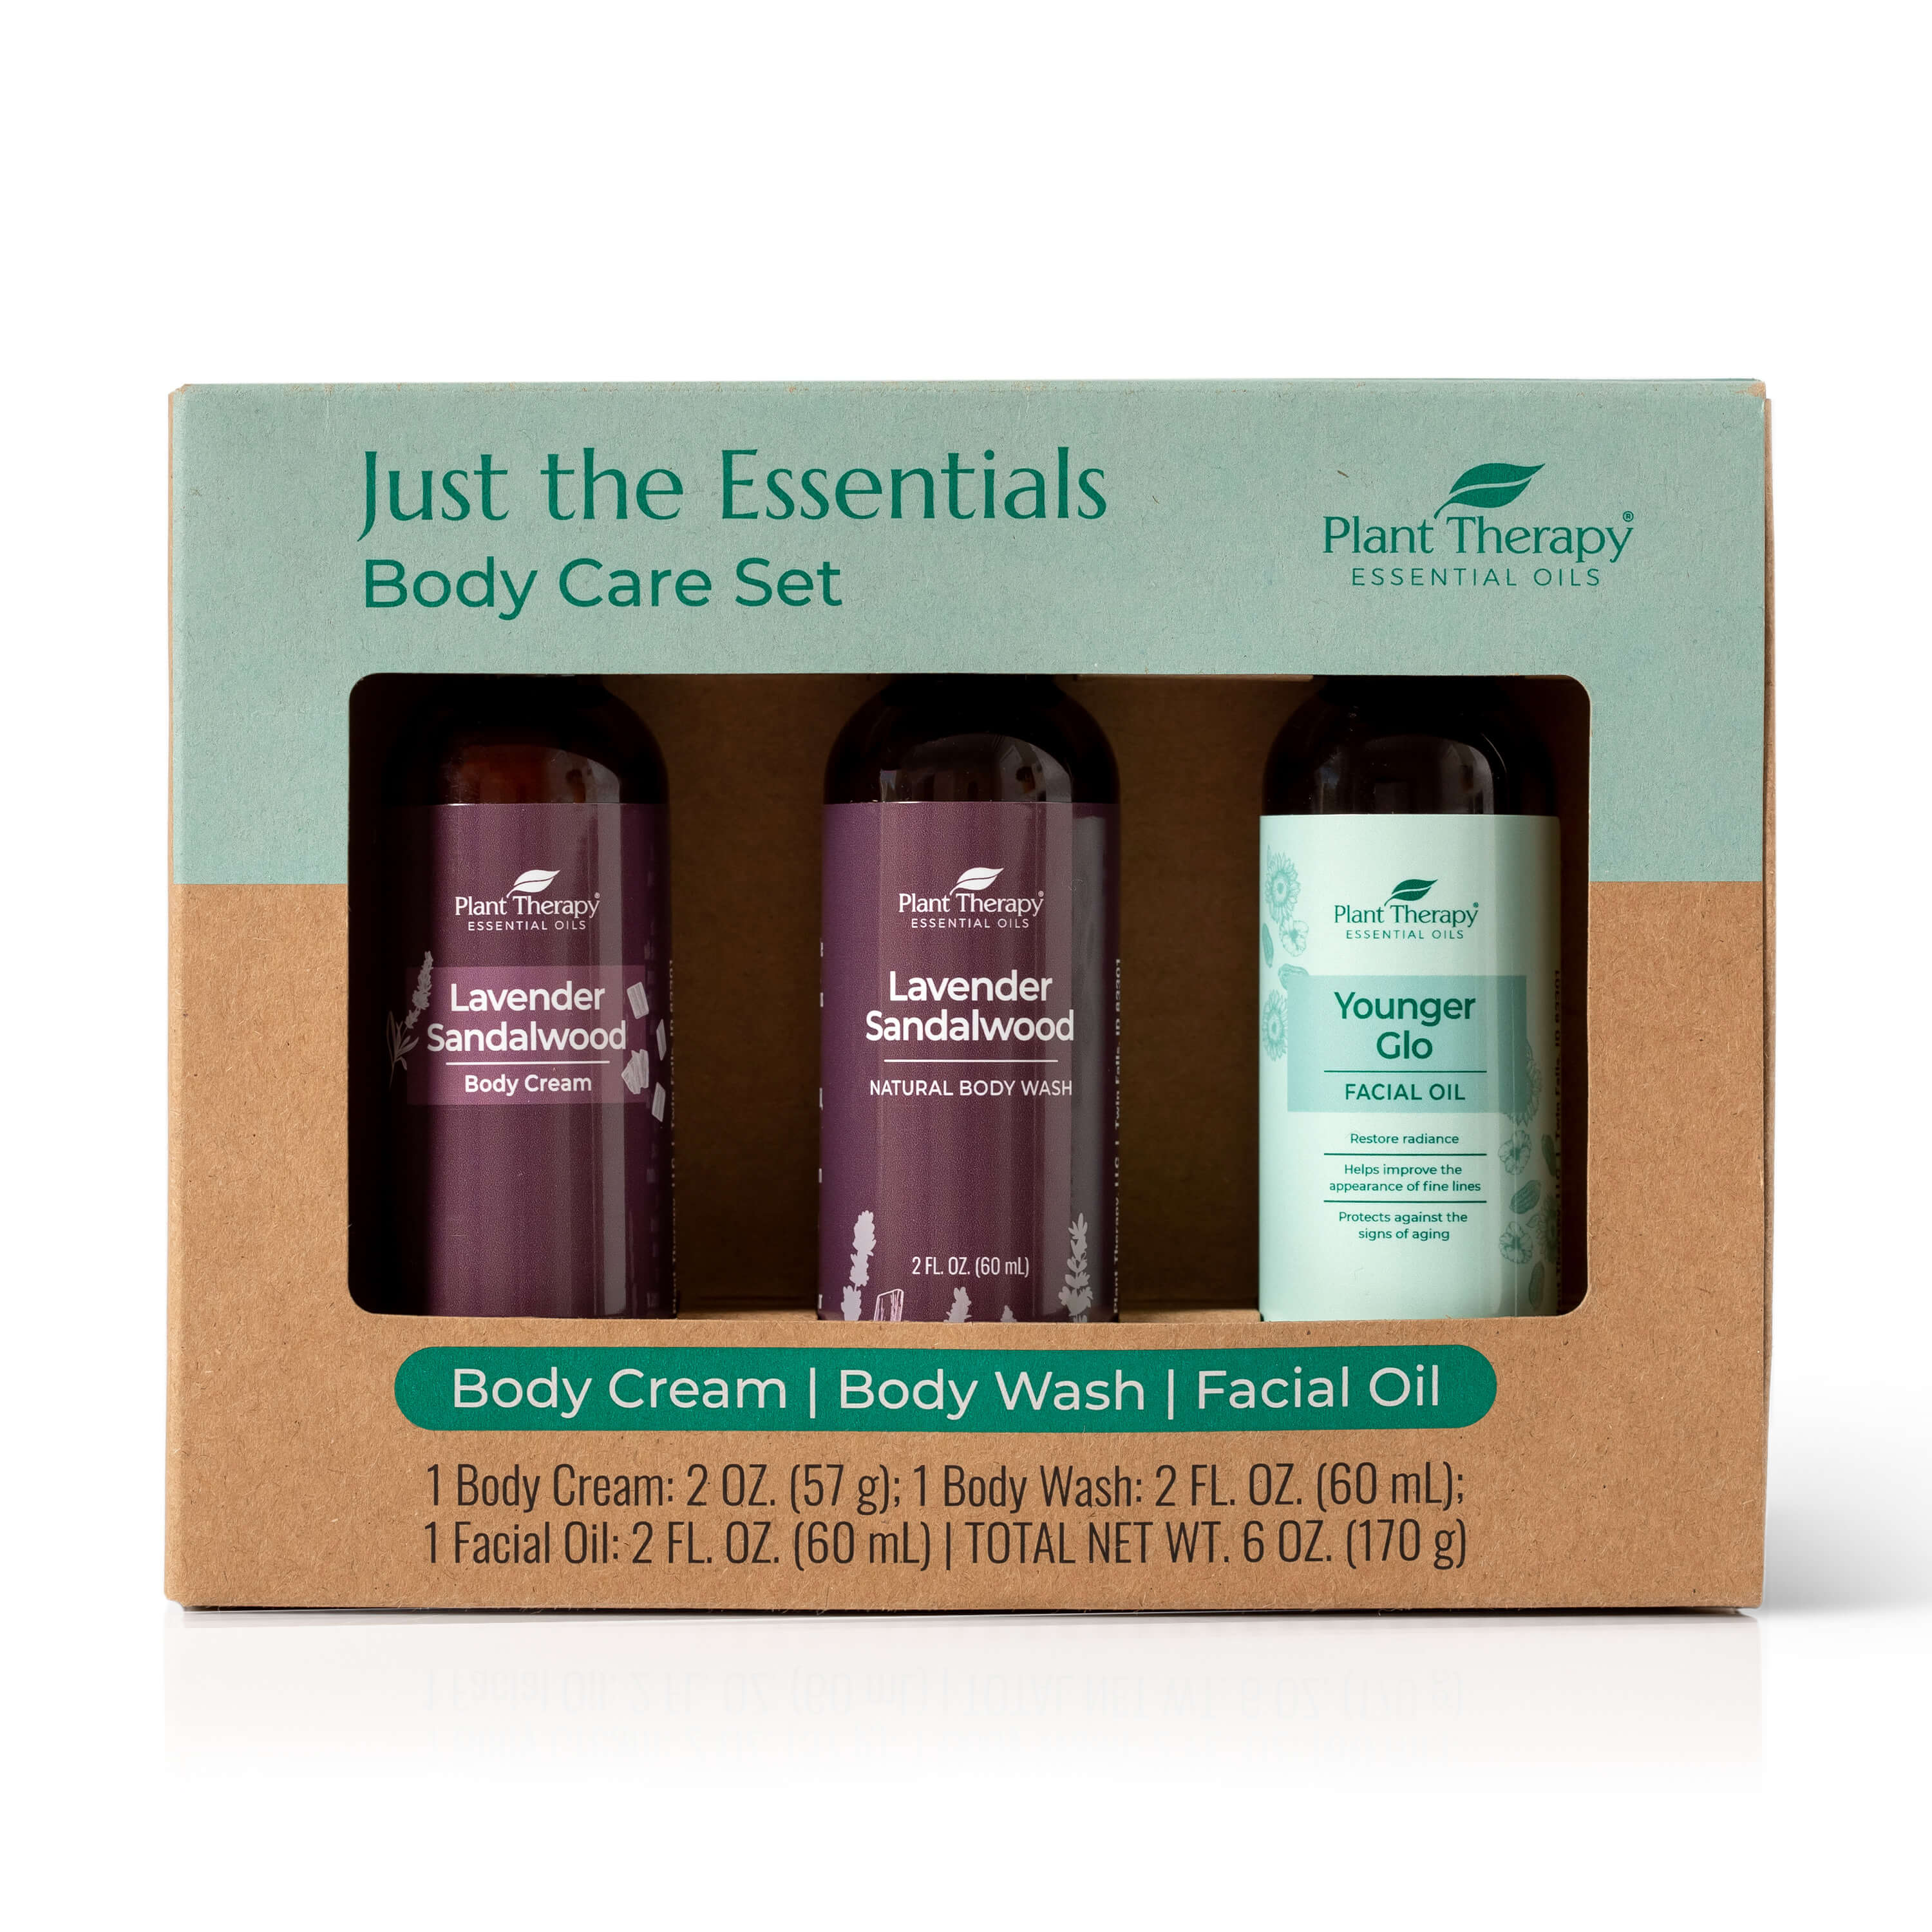 Just the Essentials Body Care Set – Plant Therapy